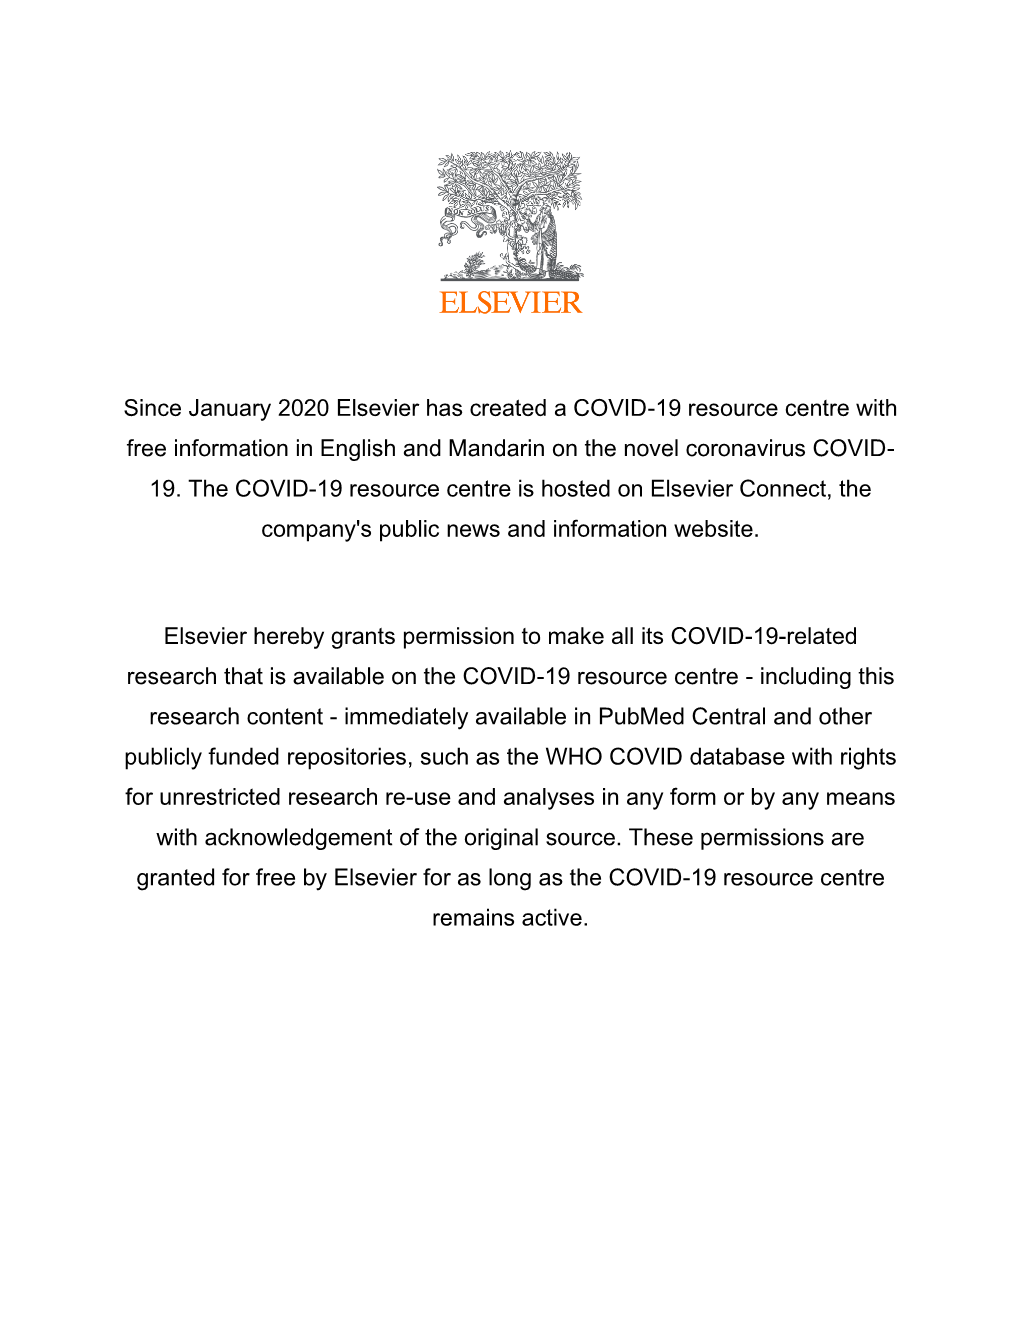 Since January 2020 Elsevier Has Created a COVID-19 Resource Centre with Free Information in English and Mandarin on the Novel Coronavirus COVID- 19